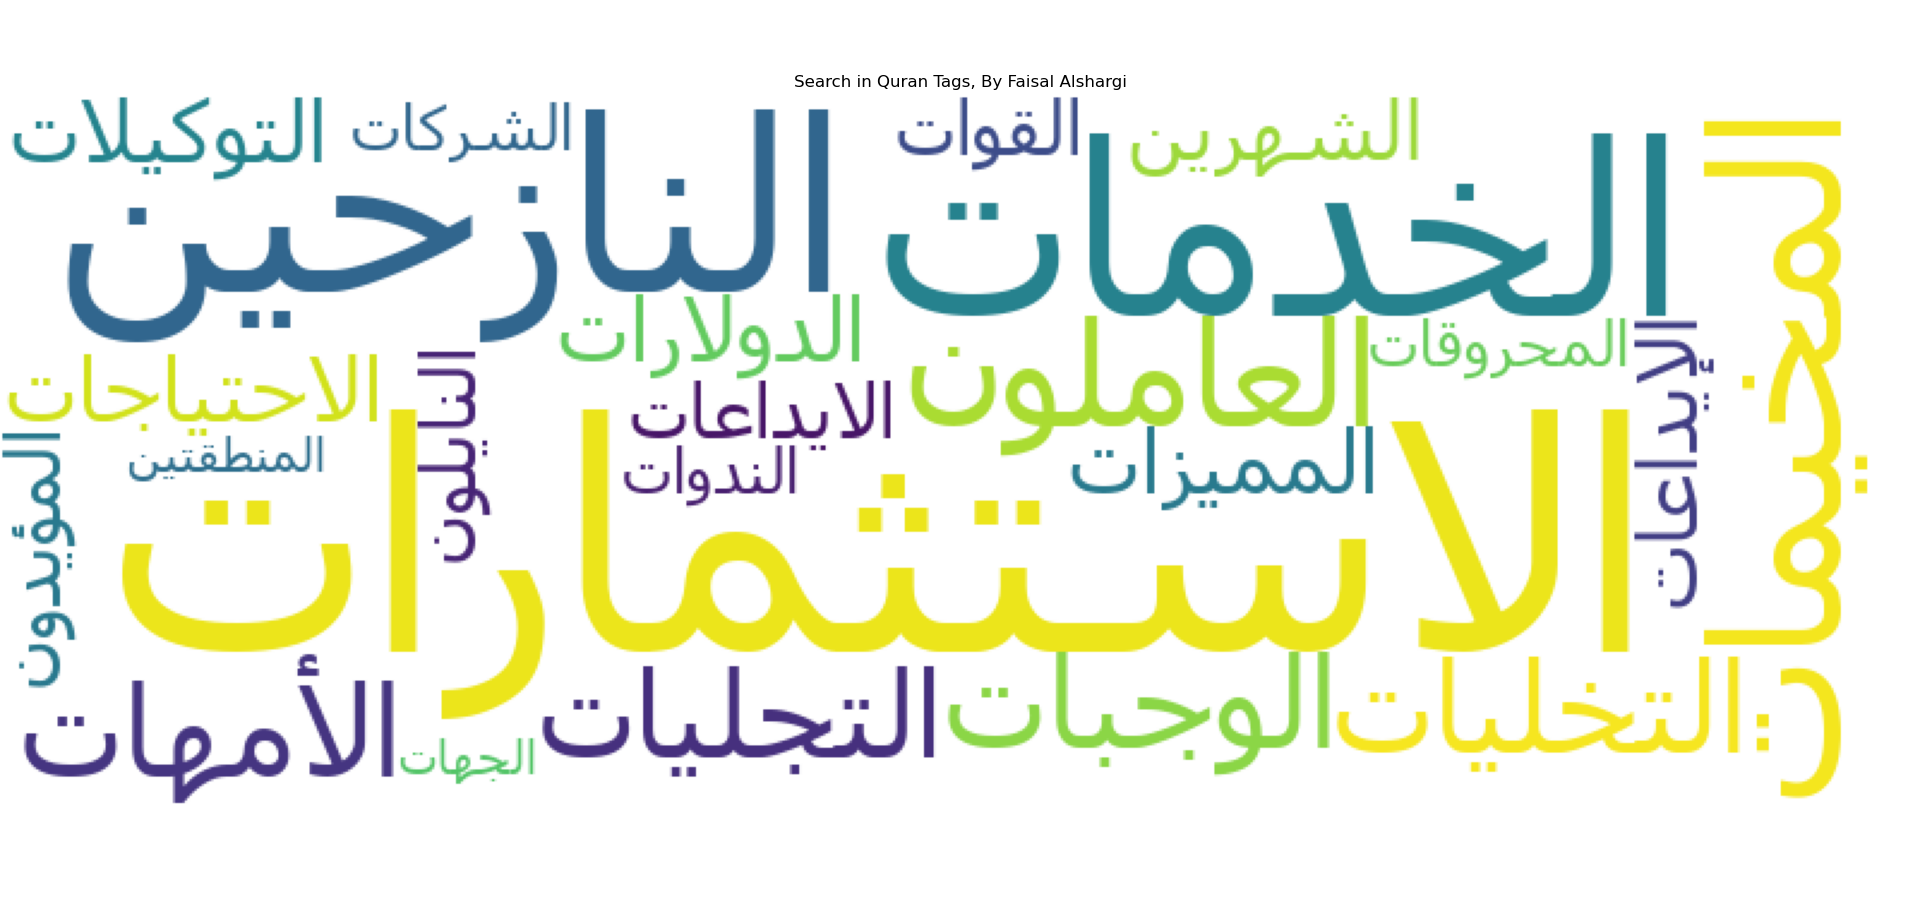 Using Stanford-Corenlp to get the Part of speech POS of Arabic Text, Python Example